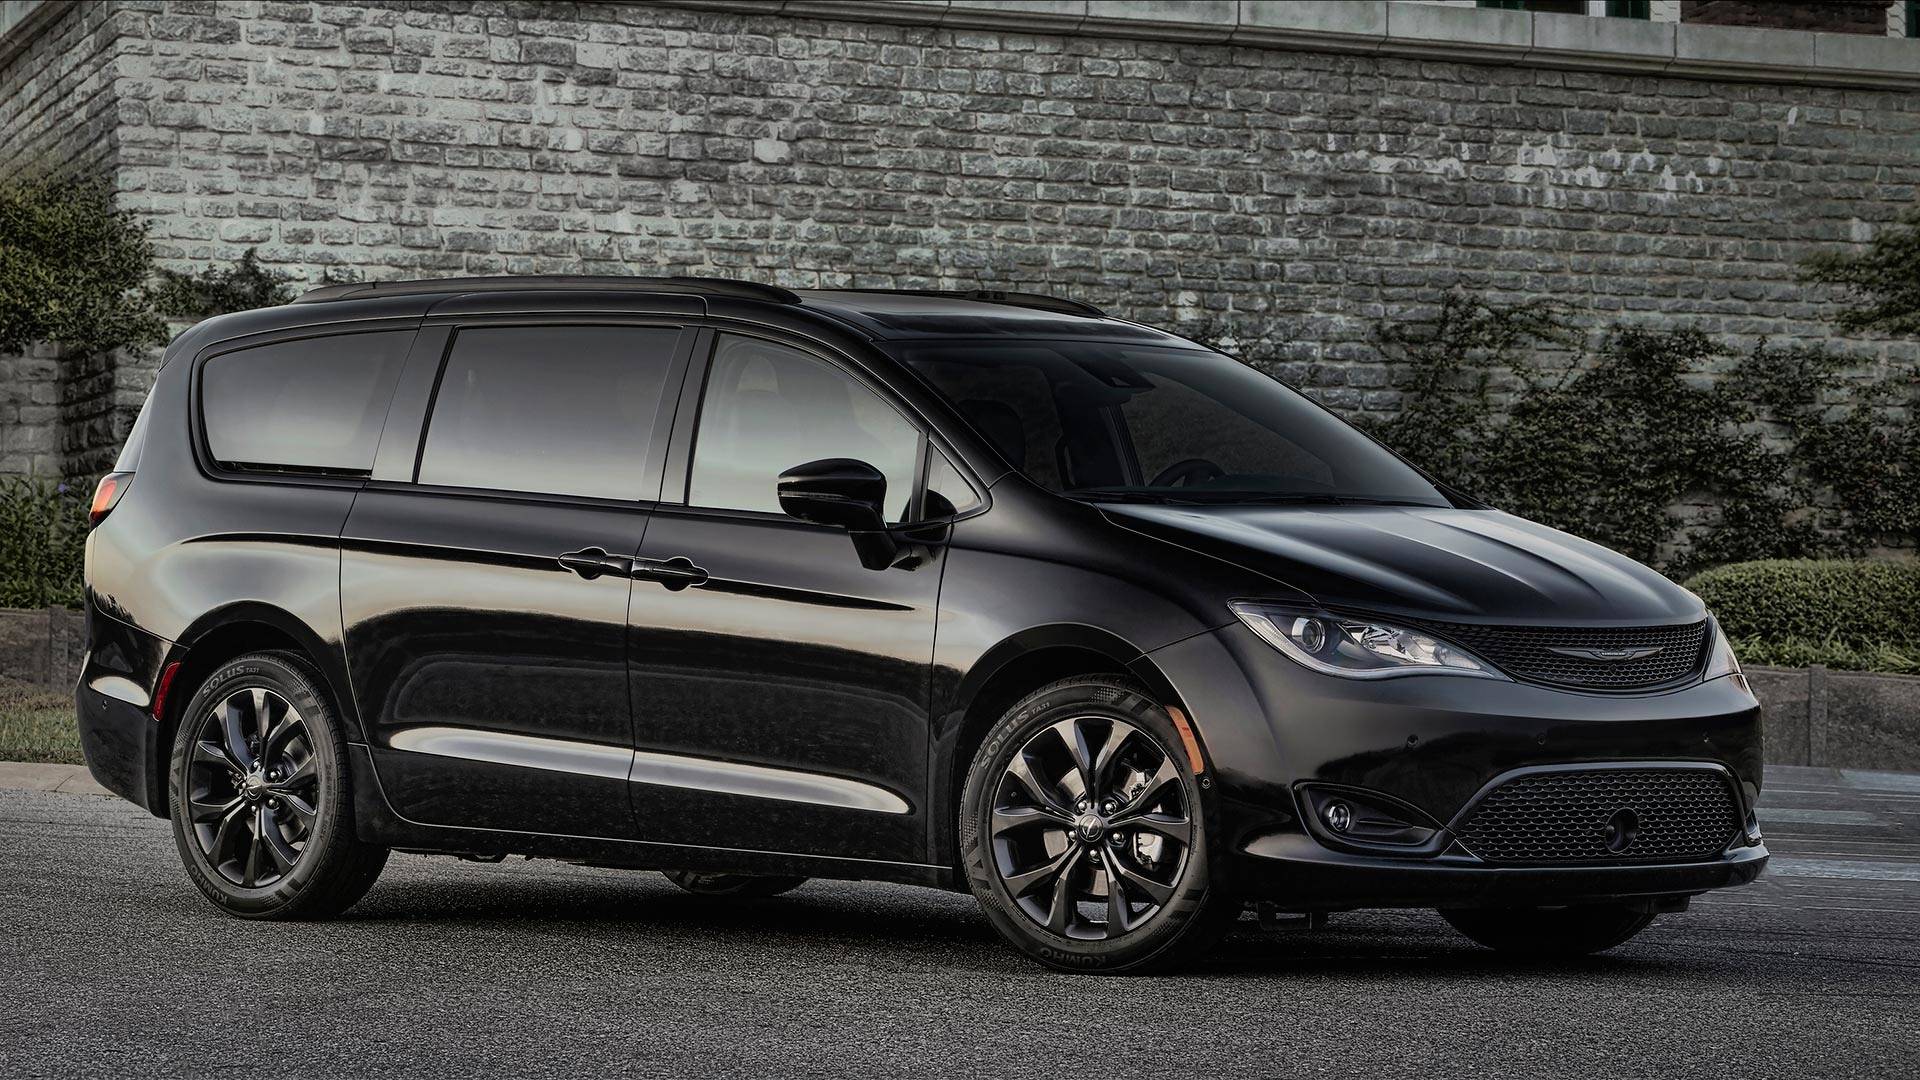 Chrysler Pacifica Awd Expected In Q2 2020 With Plug